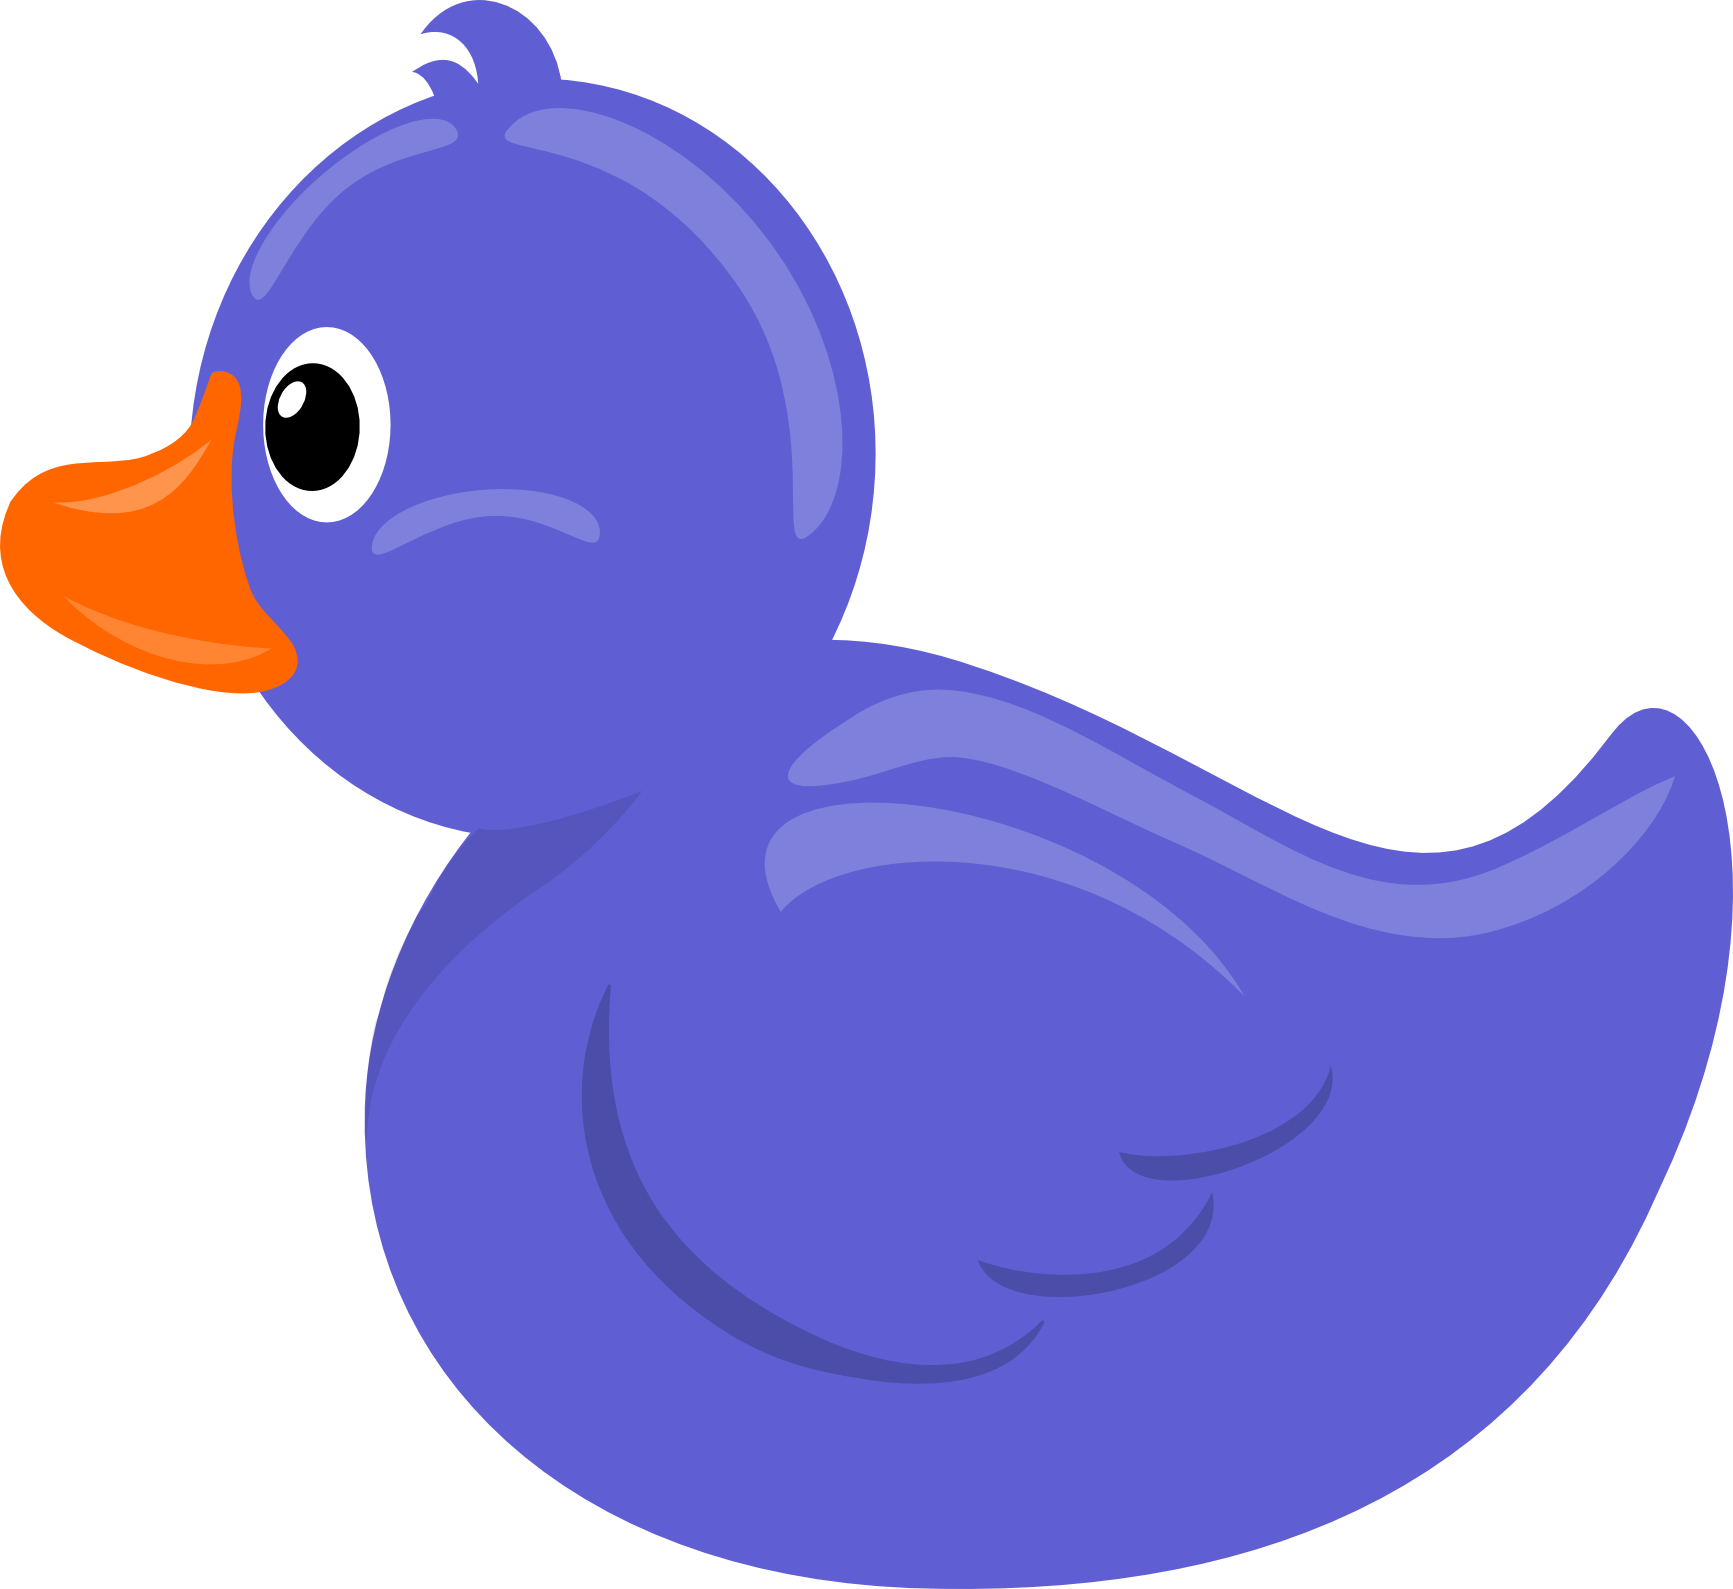 Flying Duck Images Image Hd Photo Clipart